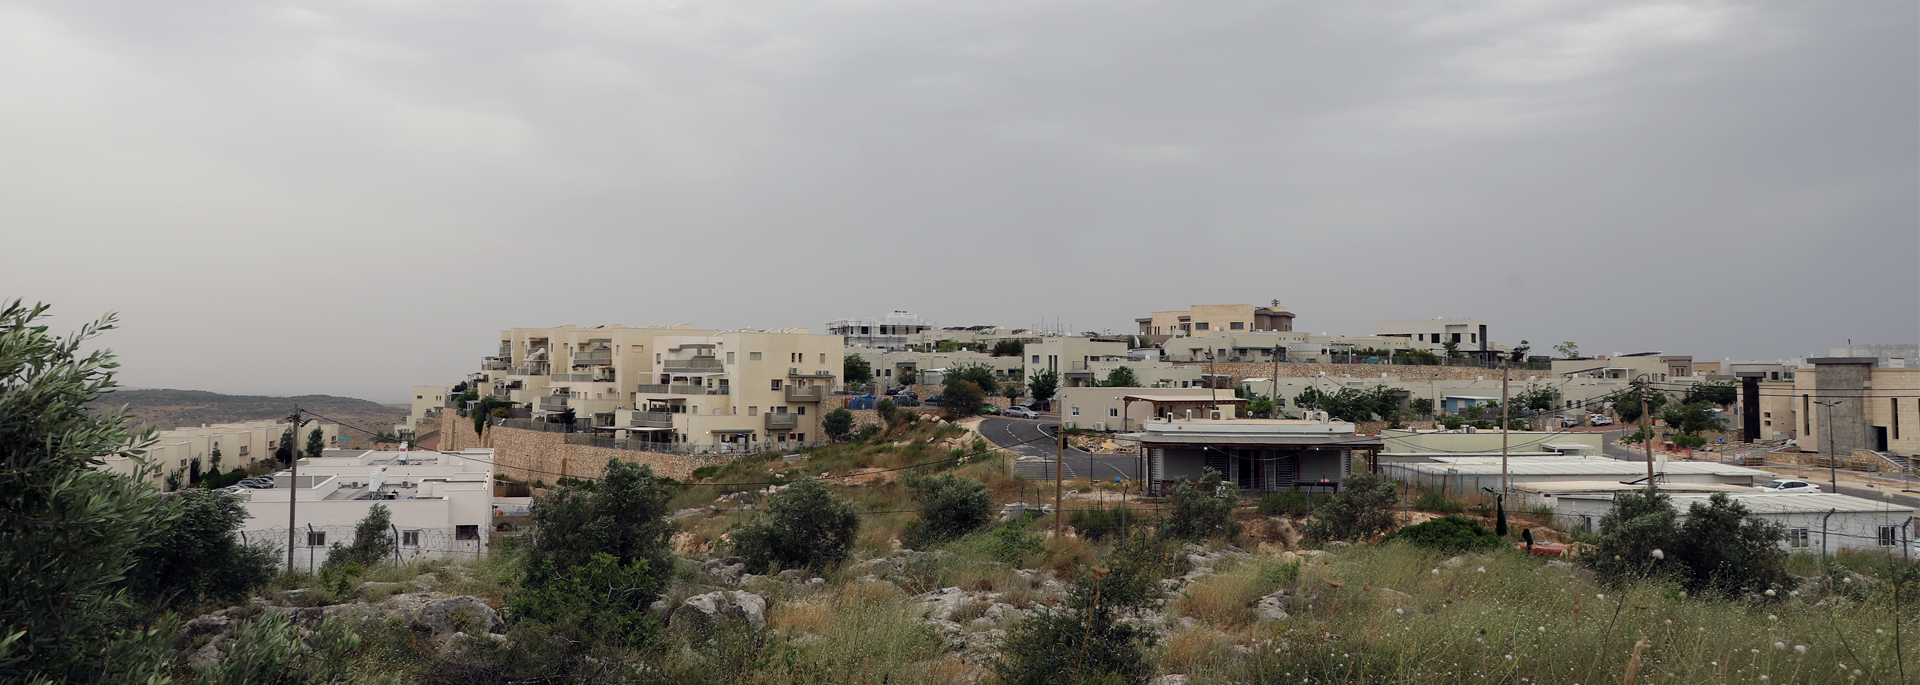 Budgets Announced Worth Millions of Shekels for Settler Colonial Construction of Expansion